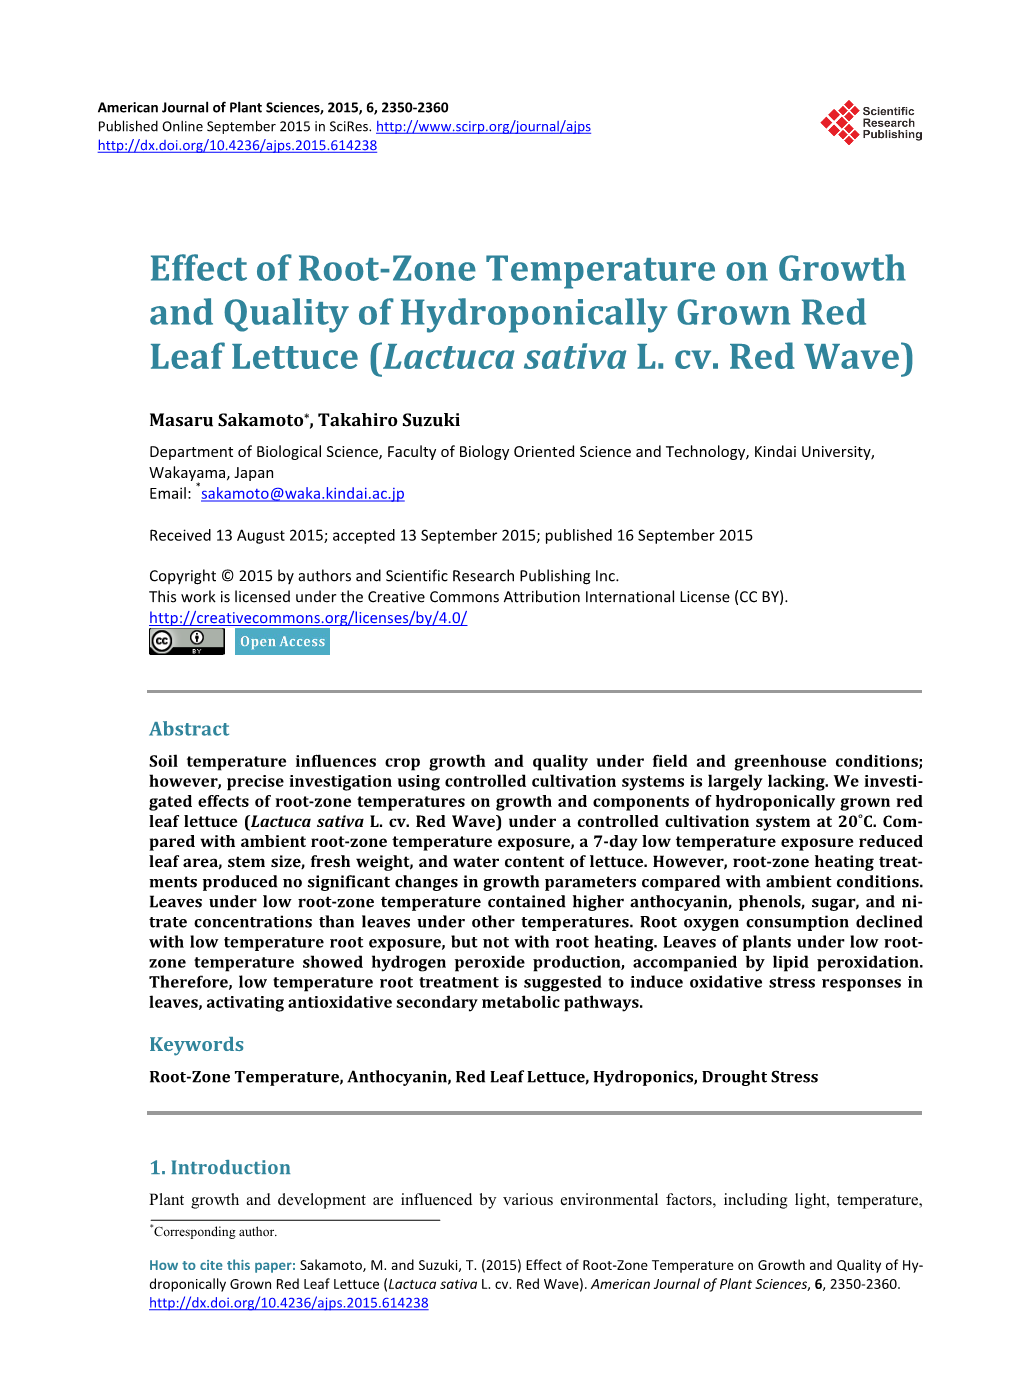 Effect of Root-Zone Temperature on Growth and Quality of Hydroponically Grown Red Leaf Lettuce (Lactuca Sativa L